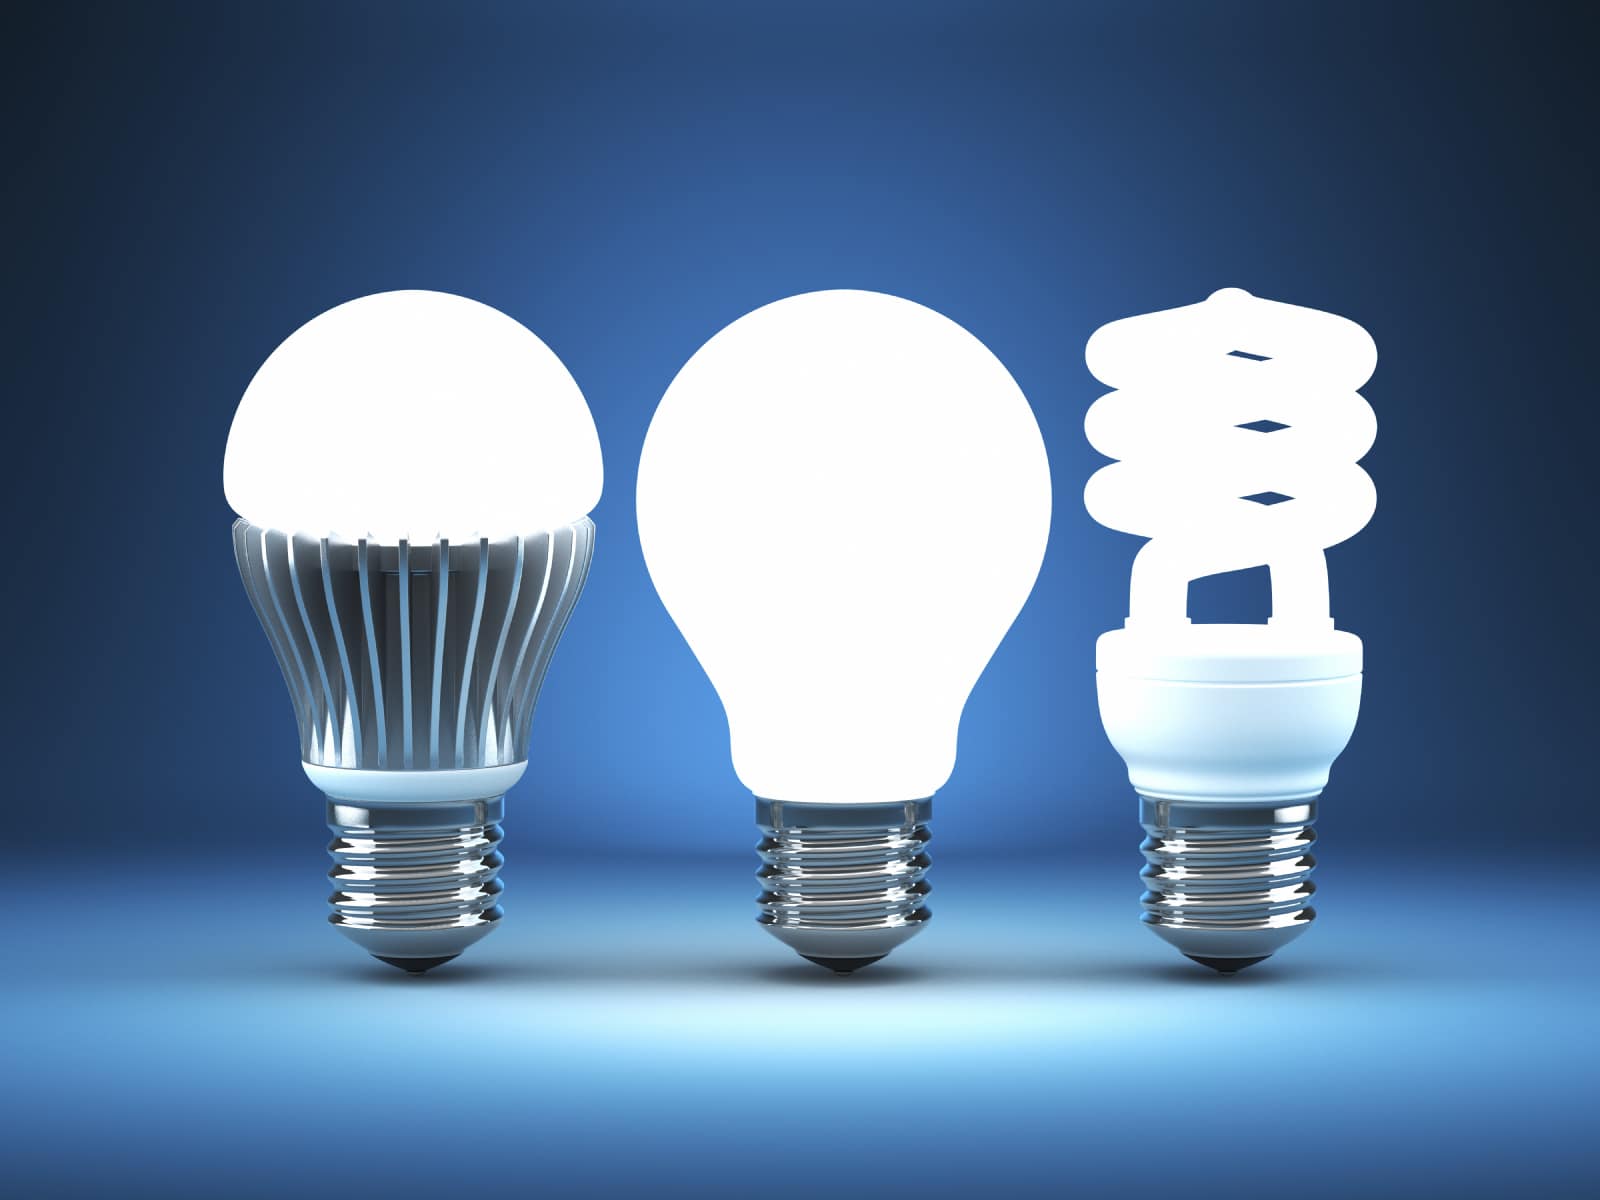 Using Energy Saving Light Bulbs: Pros, Cons, and Facts